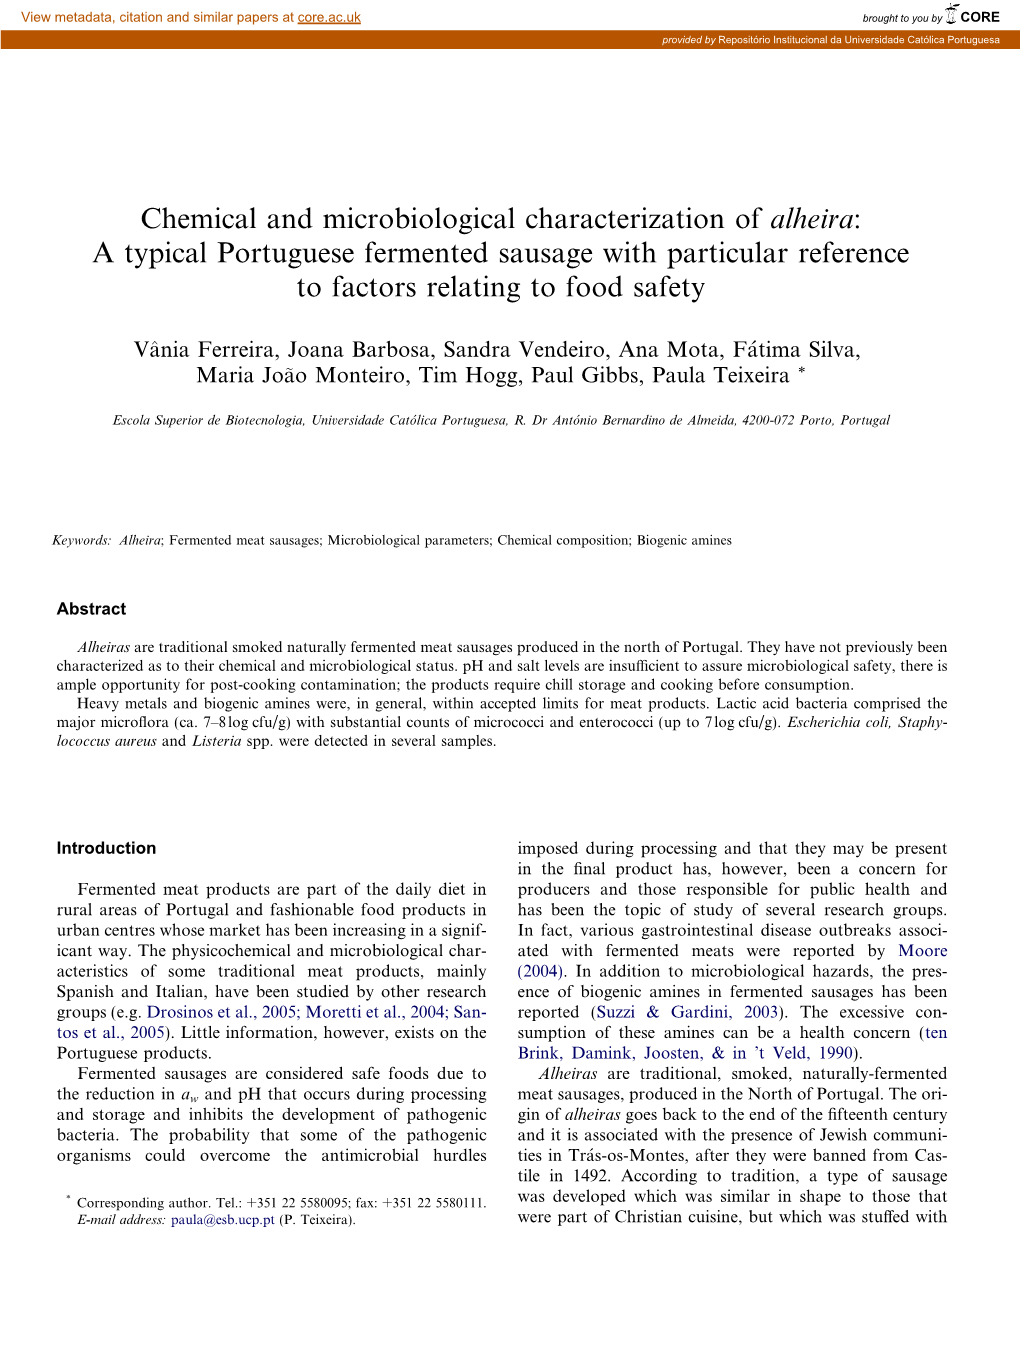 Chemical and Microbiological Characterization of Alheira: a Typical Portuguese Fermented Sausage with Particular Reference to Factors Relating to Food Safety